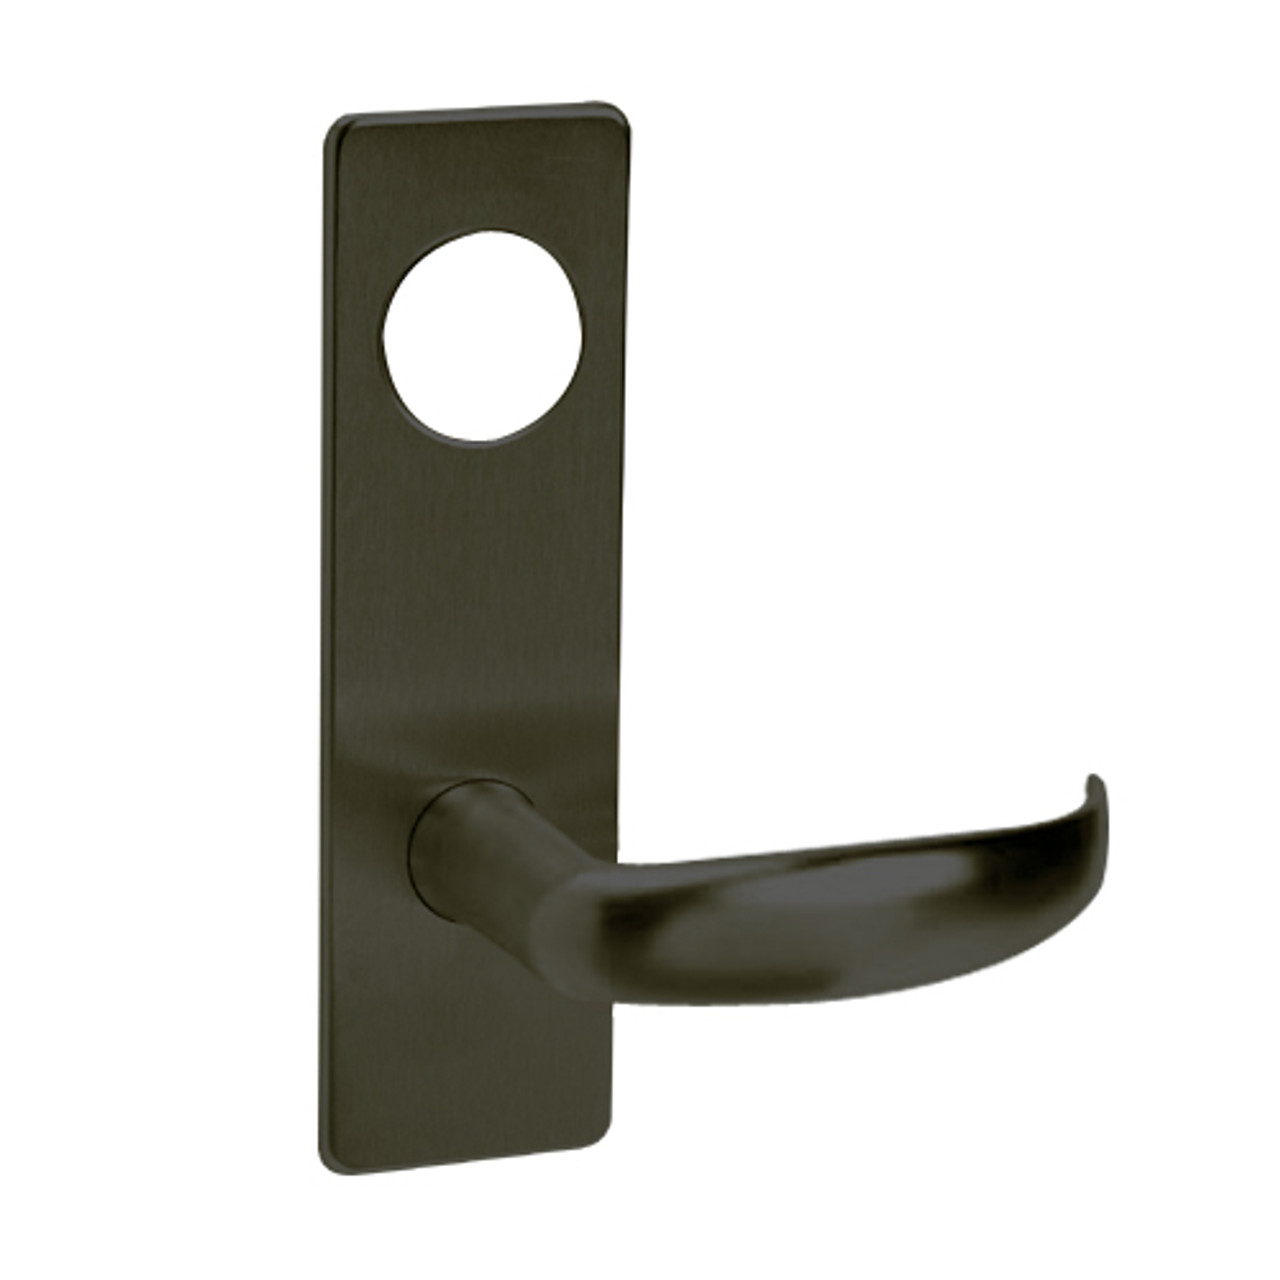 ML2059-PSM-613-M31 Corbin Russwin ML2000 Series Mortise Security Storeroom Trim Pack with Princeton Lever in Oil Rubbed Bronze